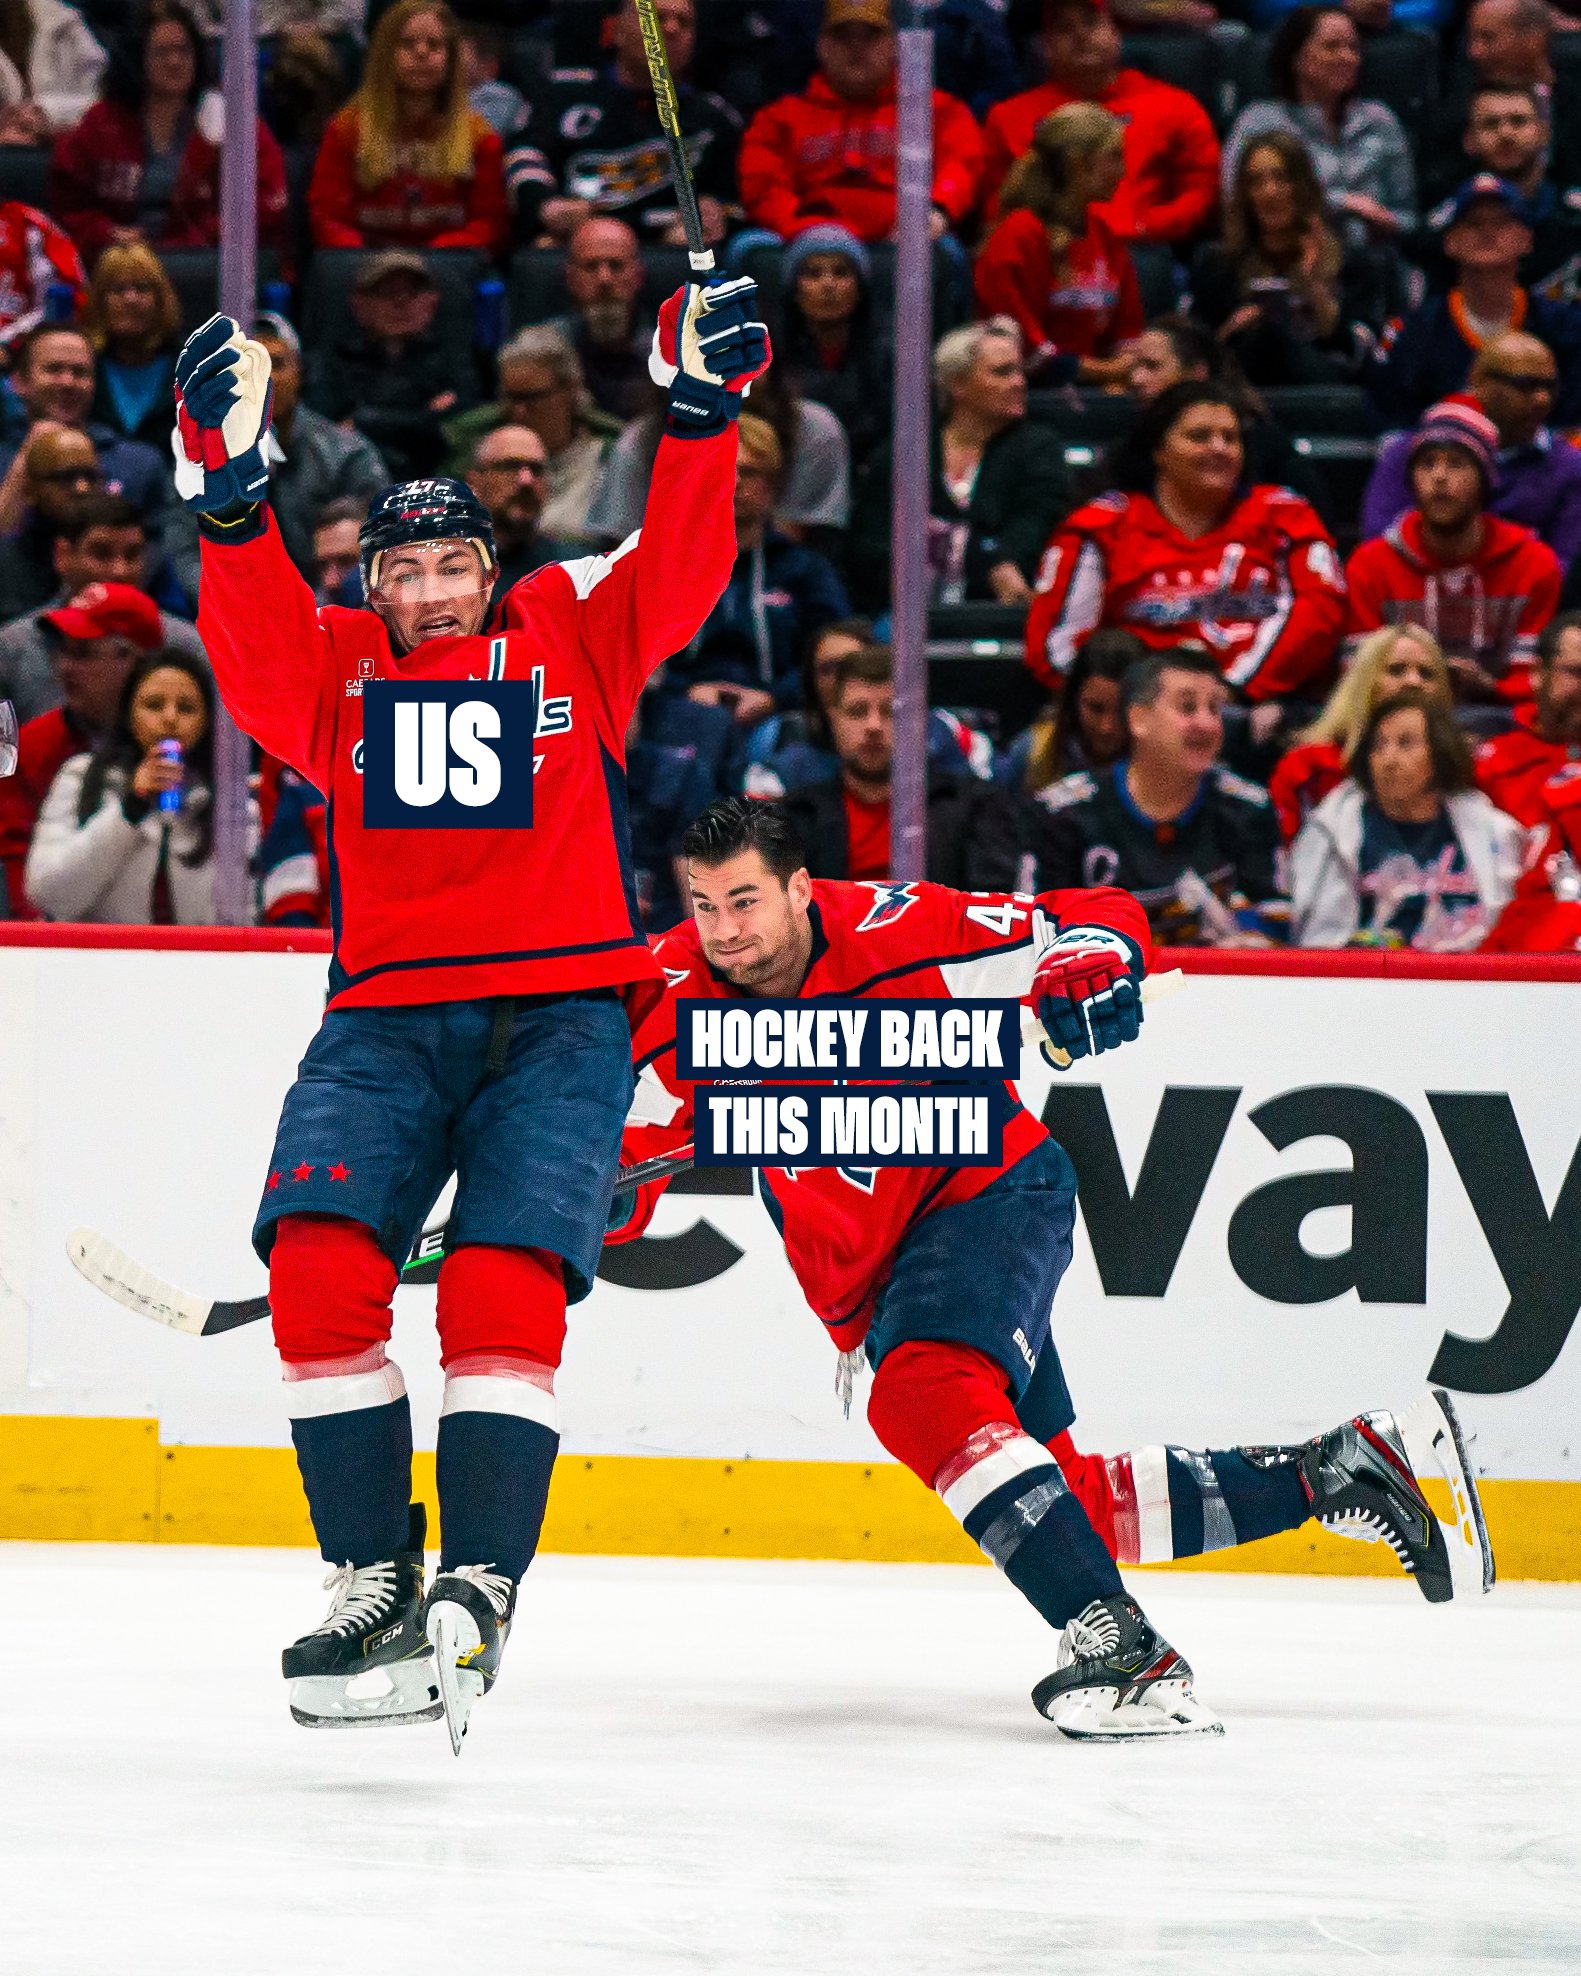 All-Star, T.J. Oshie is back where it all began